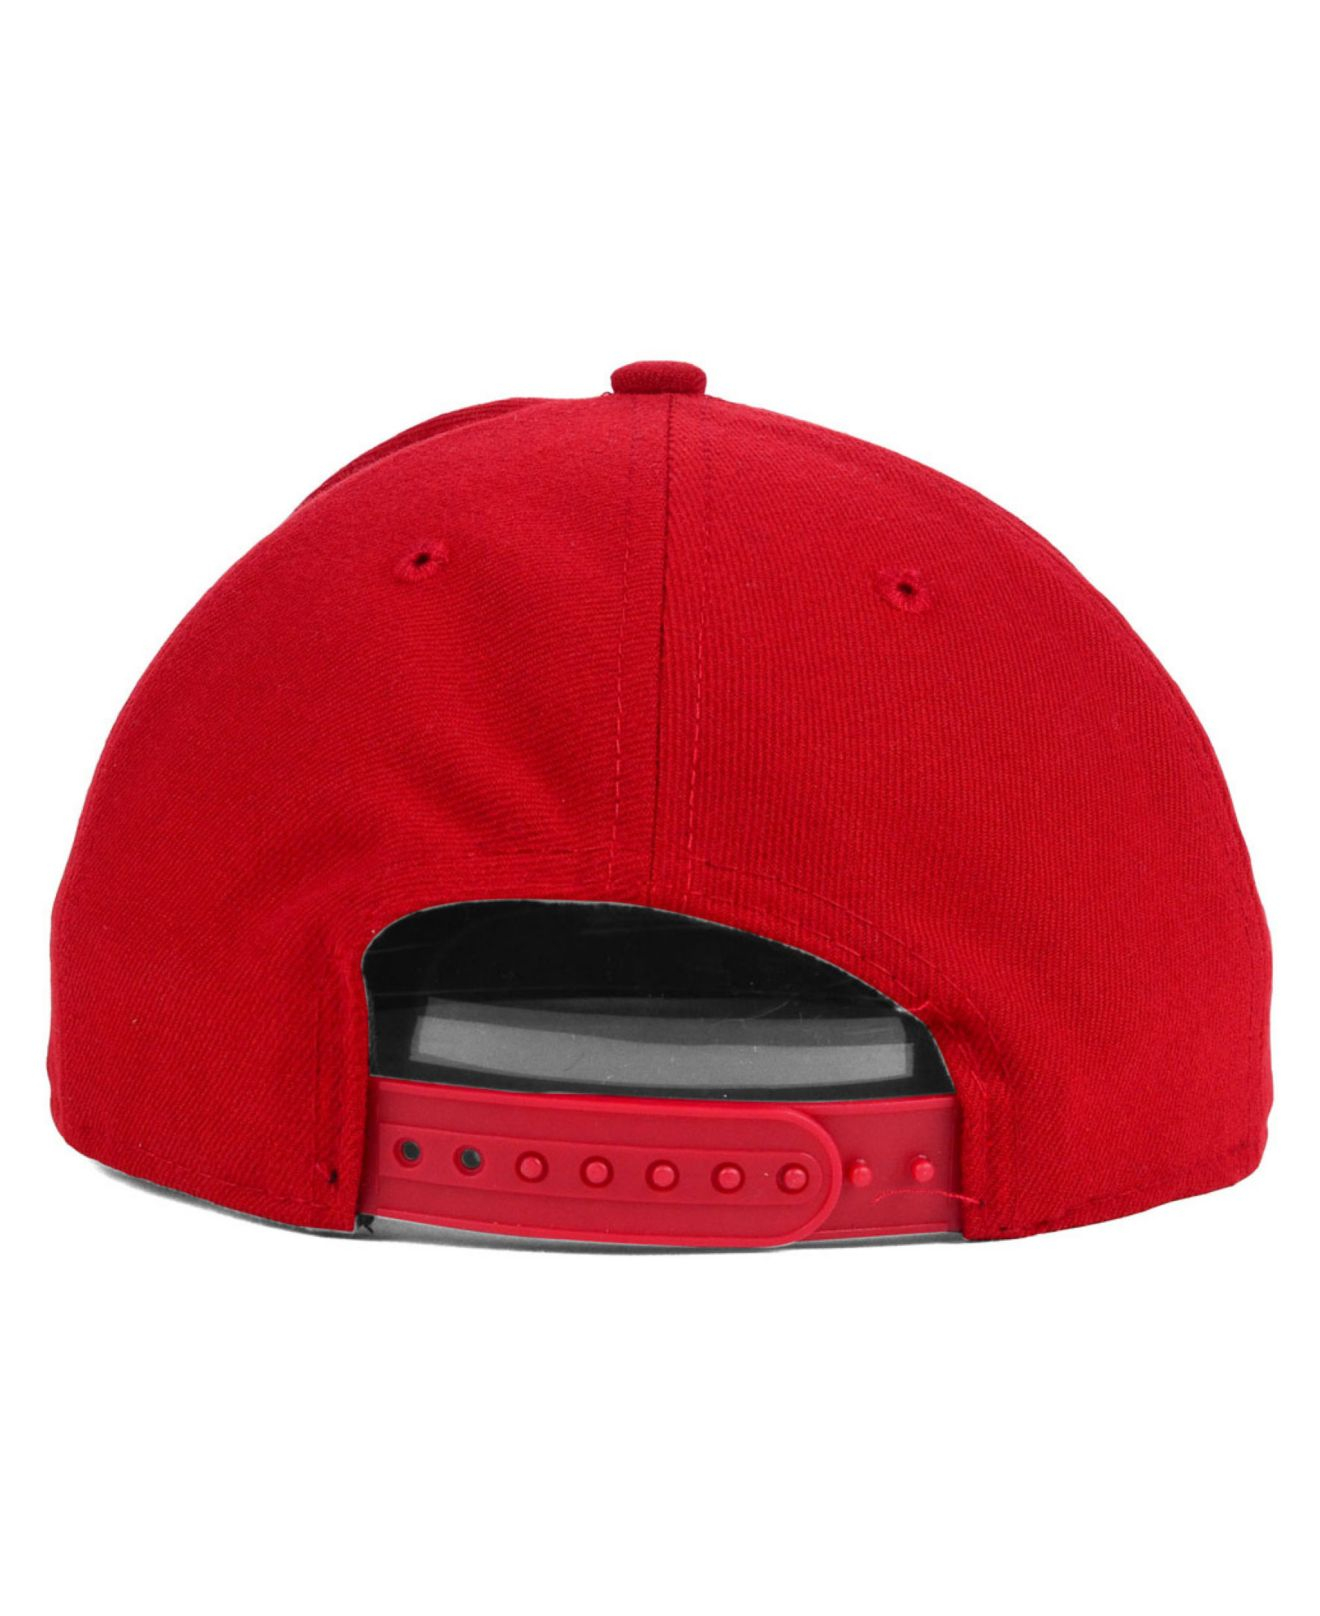 KTZ San Diego Chargers Original Fit 9Fifty Snapback Cap in Red for Men